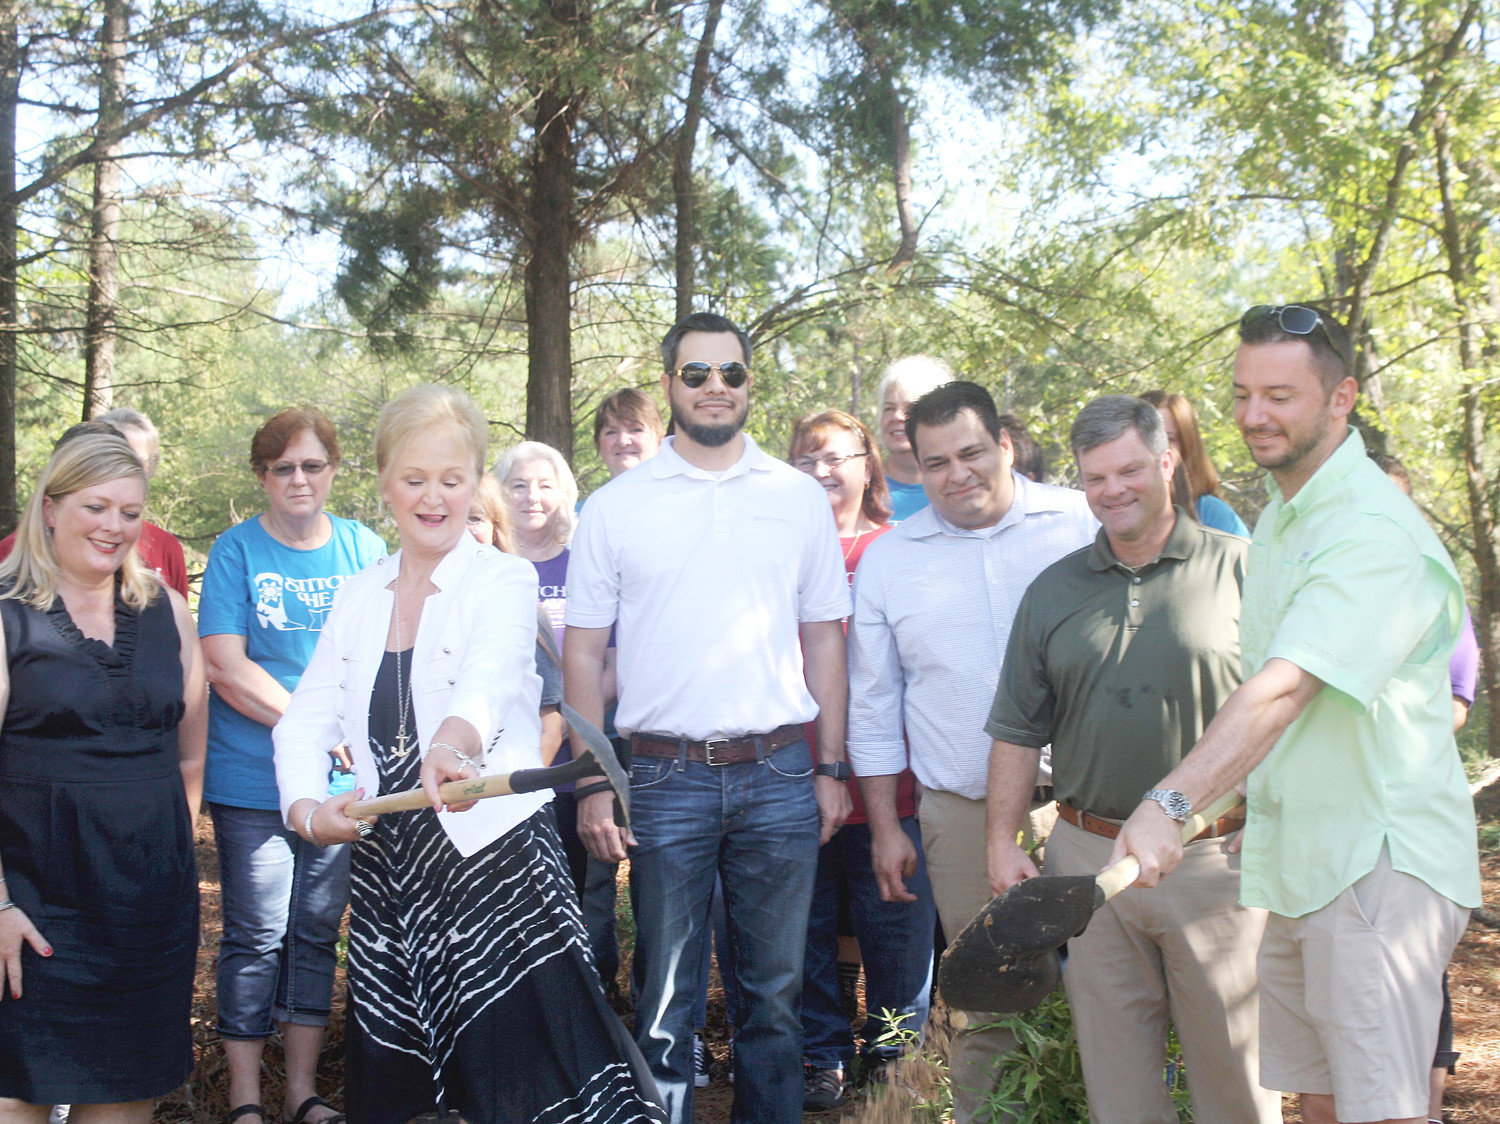 Stitchin’ Heaven co-owners Deb and Clay Luttrell shovel dirt for the groundbreaking ceremony on Sept. 6 at its future location in the Quitman Business Park. From left to right: Quitman Development Corporation Executive Director Denea Hudman, Deb Luttrell, Marc Loredo of BBVA Compass Bank, Quitman city secretary/administrator Andrew Kloefkorn, Quitman Mayor David Dobbs and Clay Luttrell.